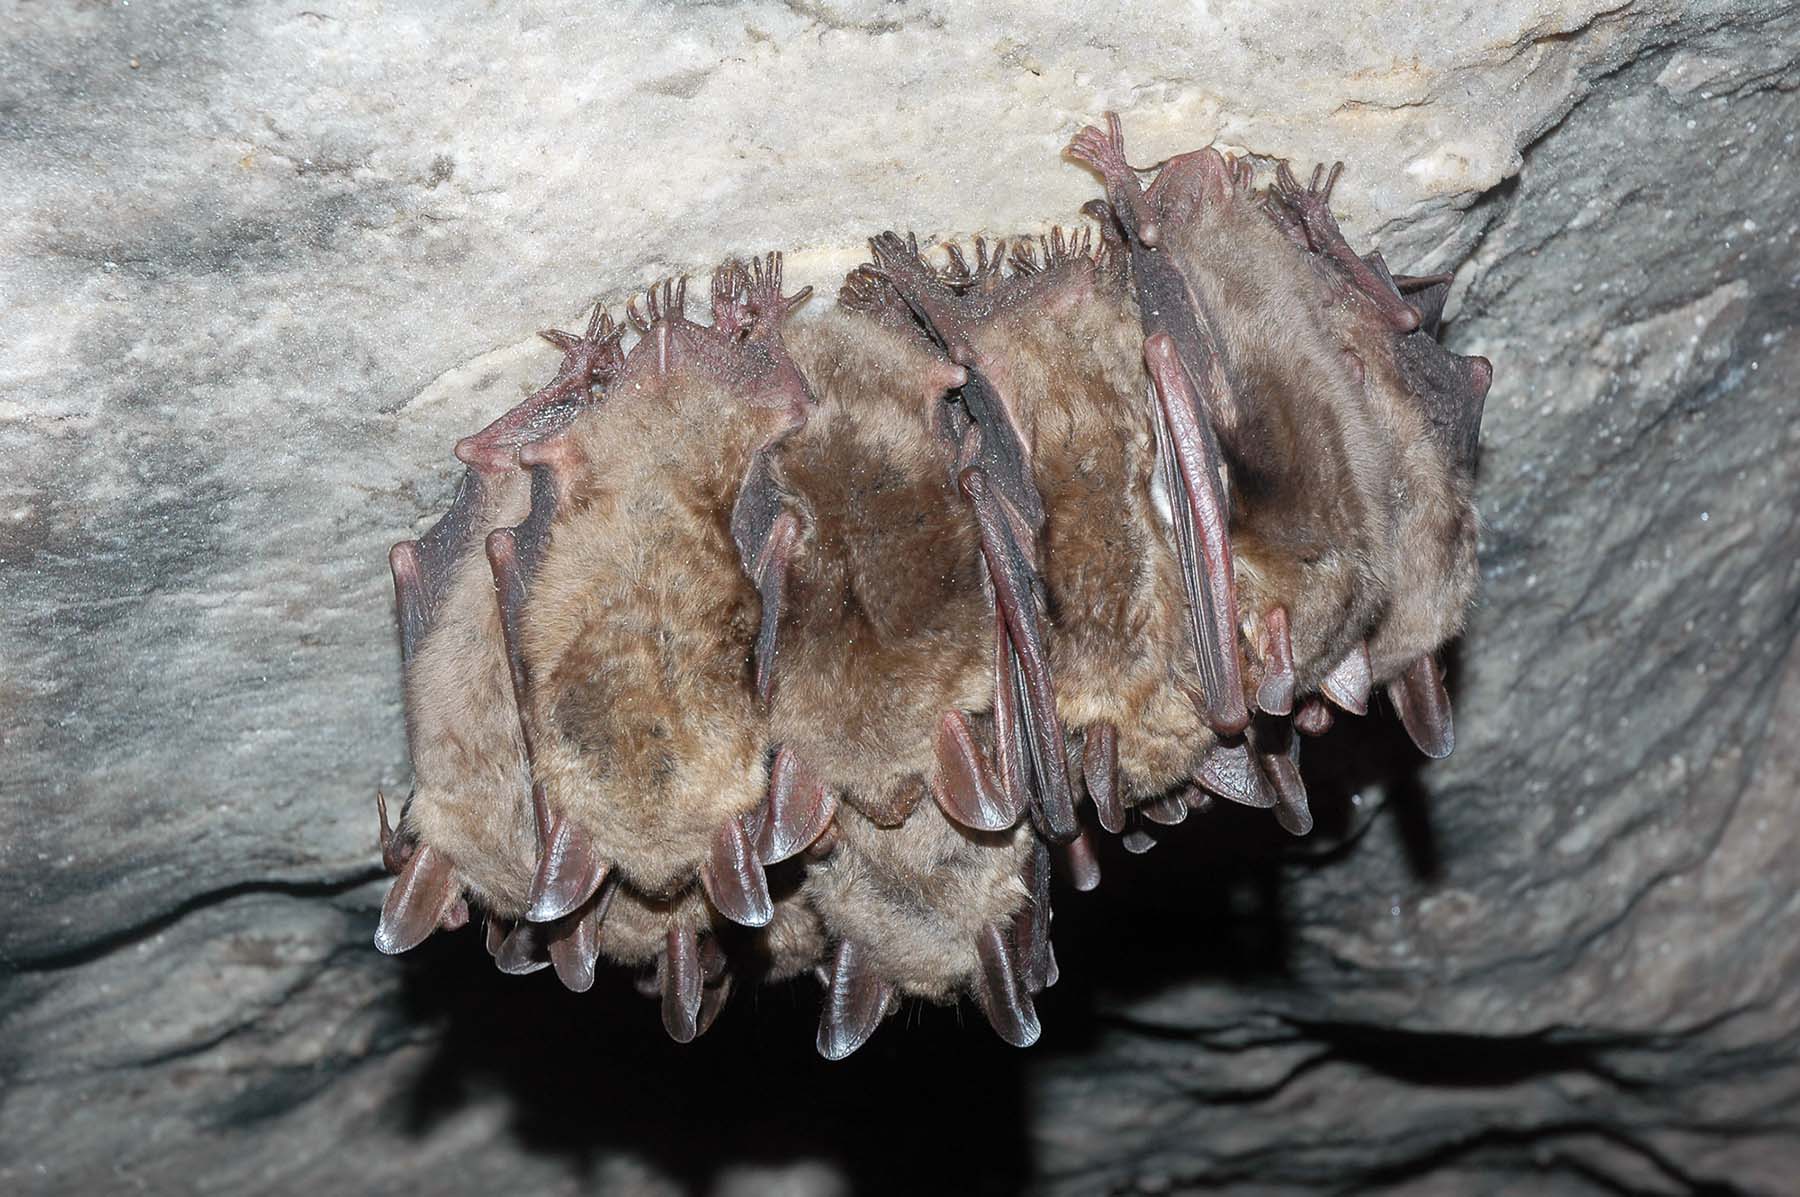 We may think that bats only reside in caves like this one, but that's not correct.